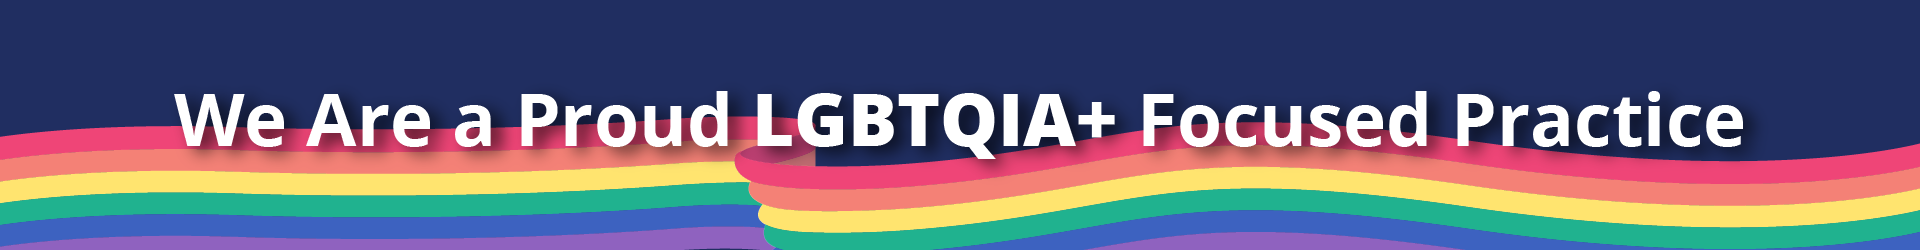 We are a proud LGBTQIA+ focused practice banner